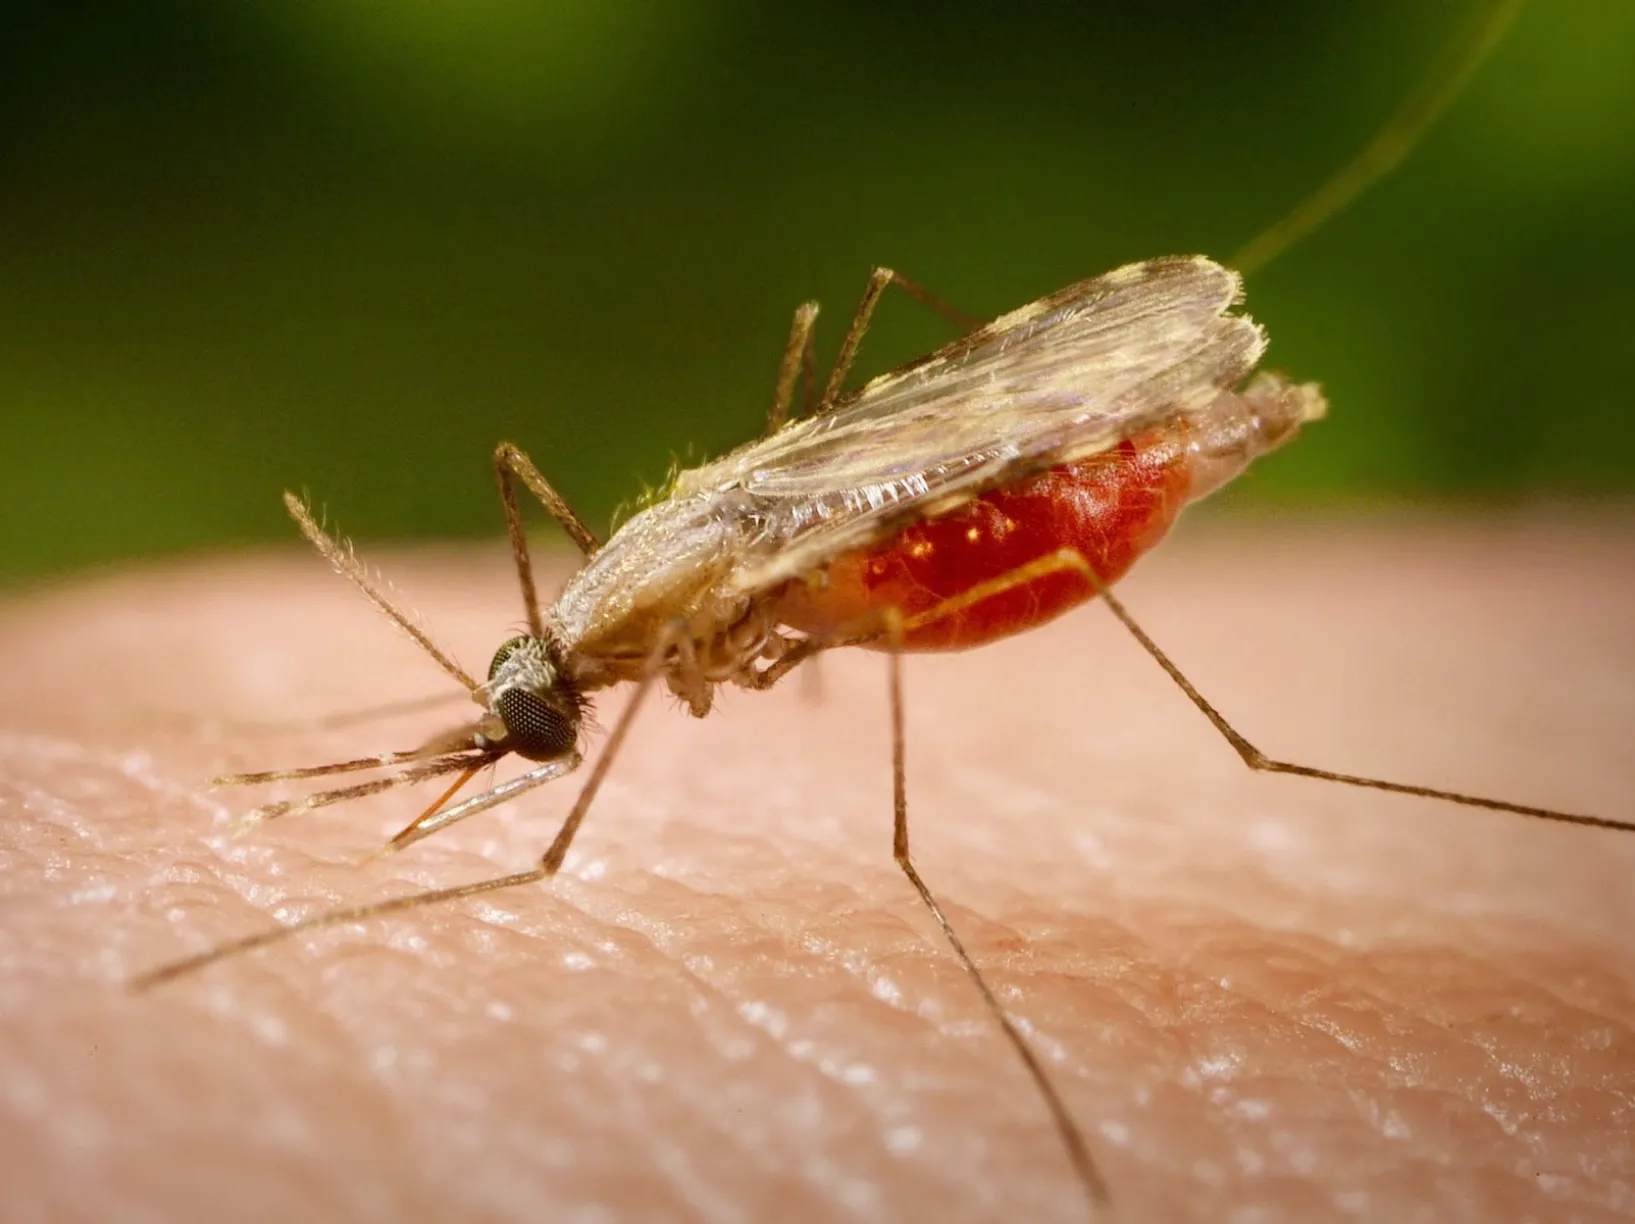 malaria article showing mosquito photo 